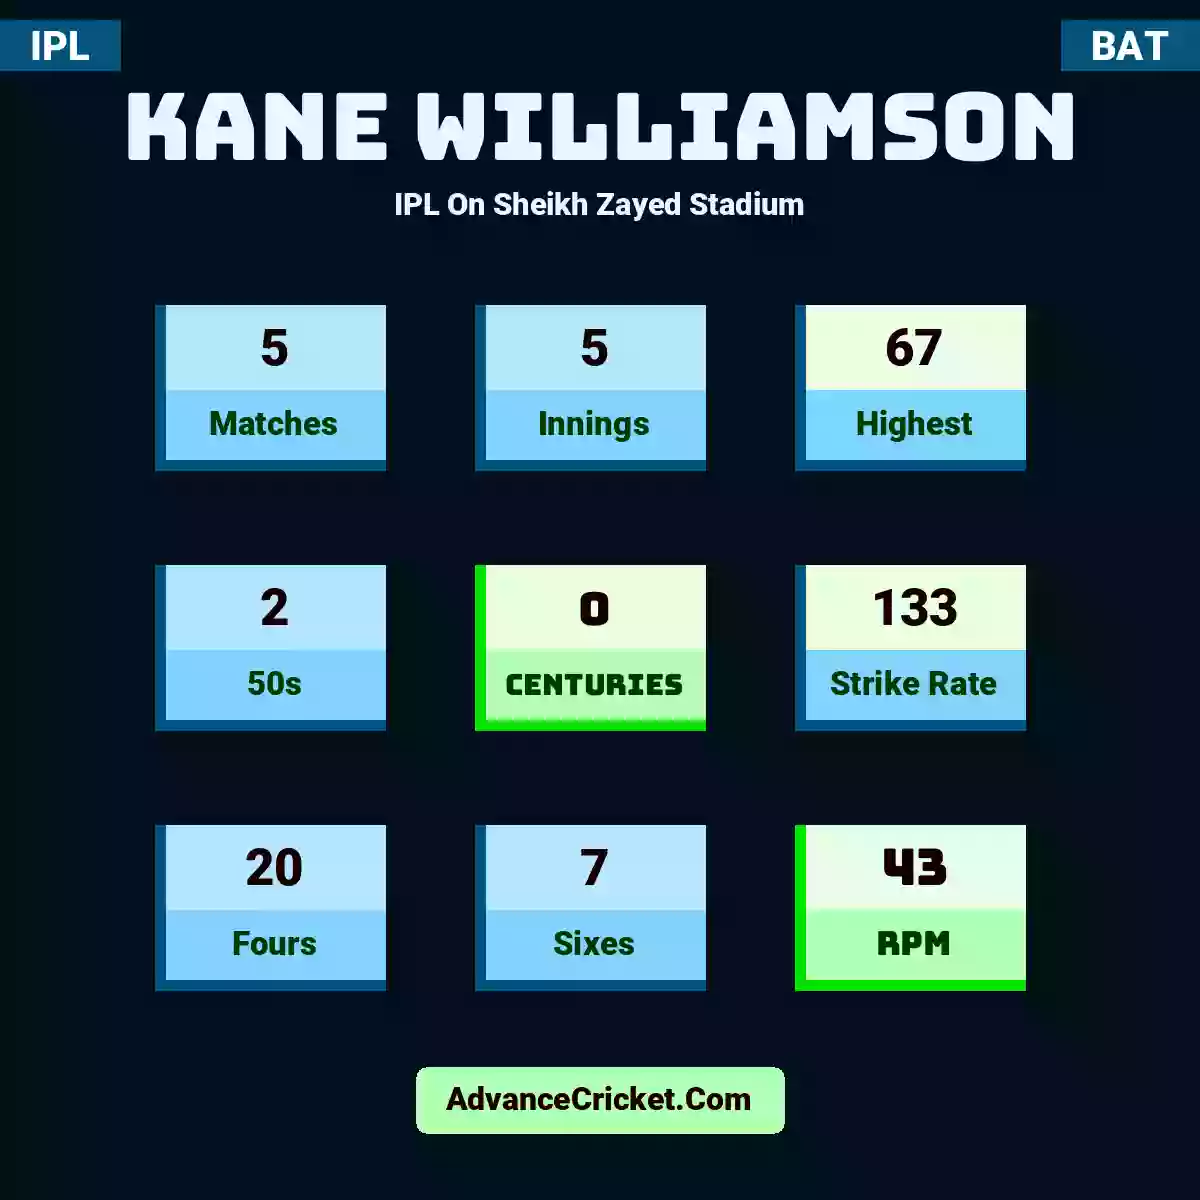 Kane Williamson IPL  On Sheikh Zayed Stadium, Kane Williamson played 5 matches, scored 67 runs as highest, 2 half-centuries, and 0 centuries, with a strike rate of 133. K.Williamson hit 20 fours and 7 sixes, with an RPM of 43.